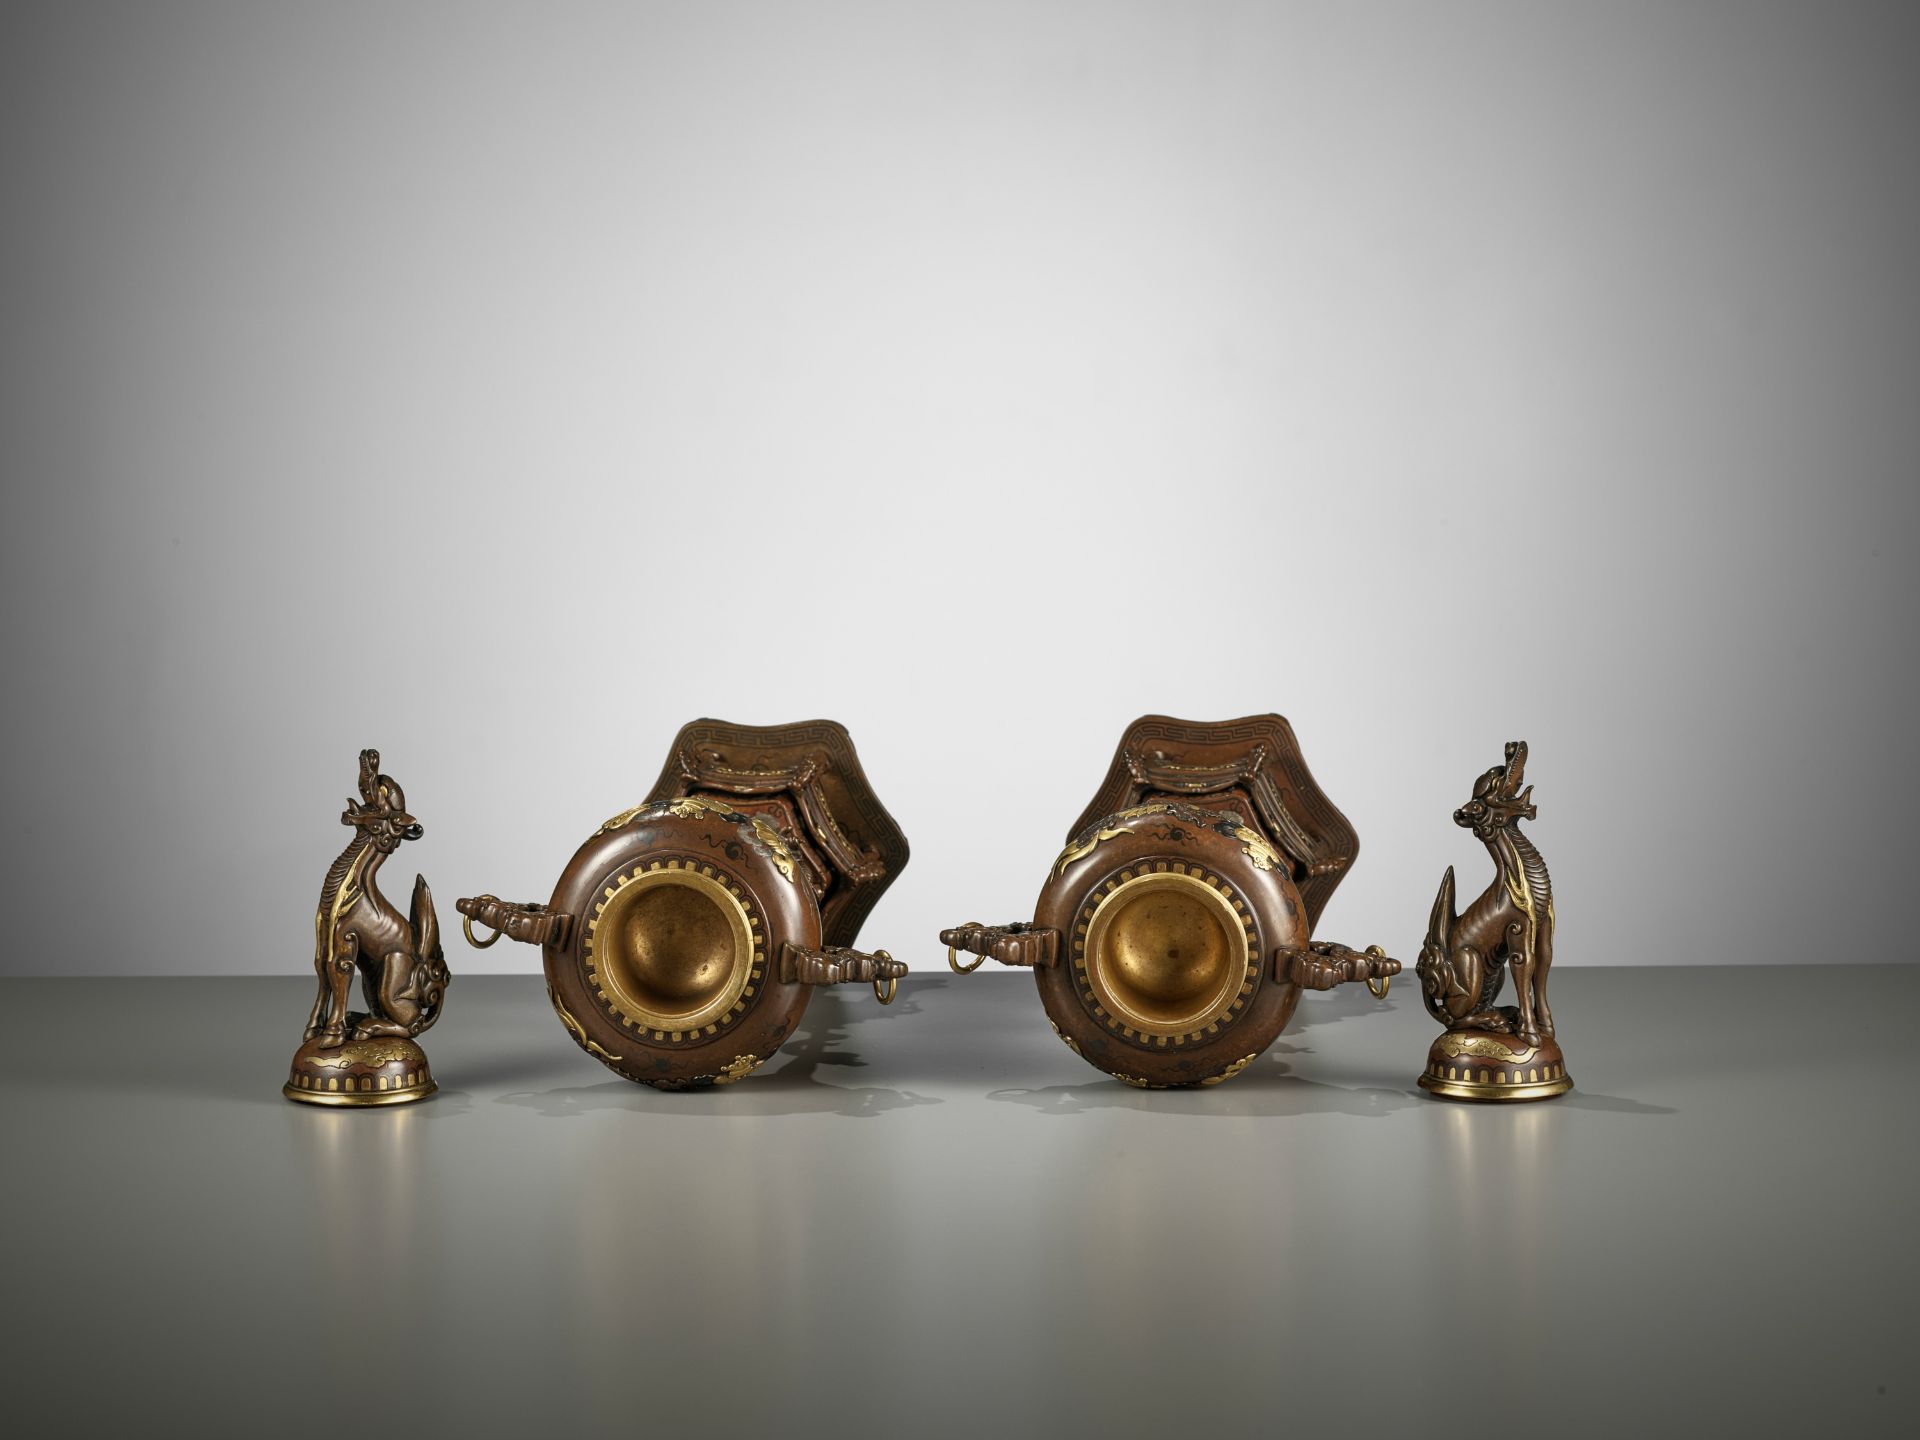 A PAIR OF SUPERB GOLD-INLAID BRONZE 'MYTHICAL BEASTS' KORO (INCENSE BURNERS) AND COVERS - Image 20 of 20